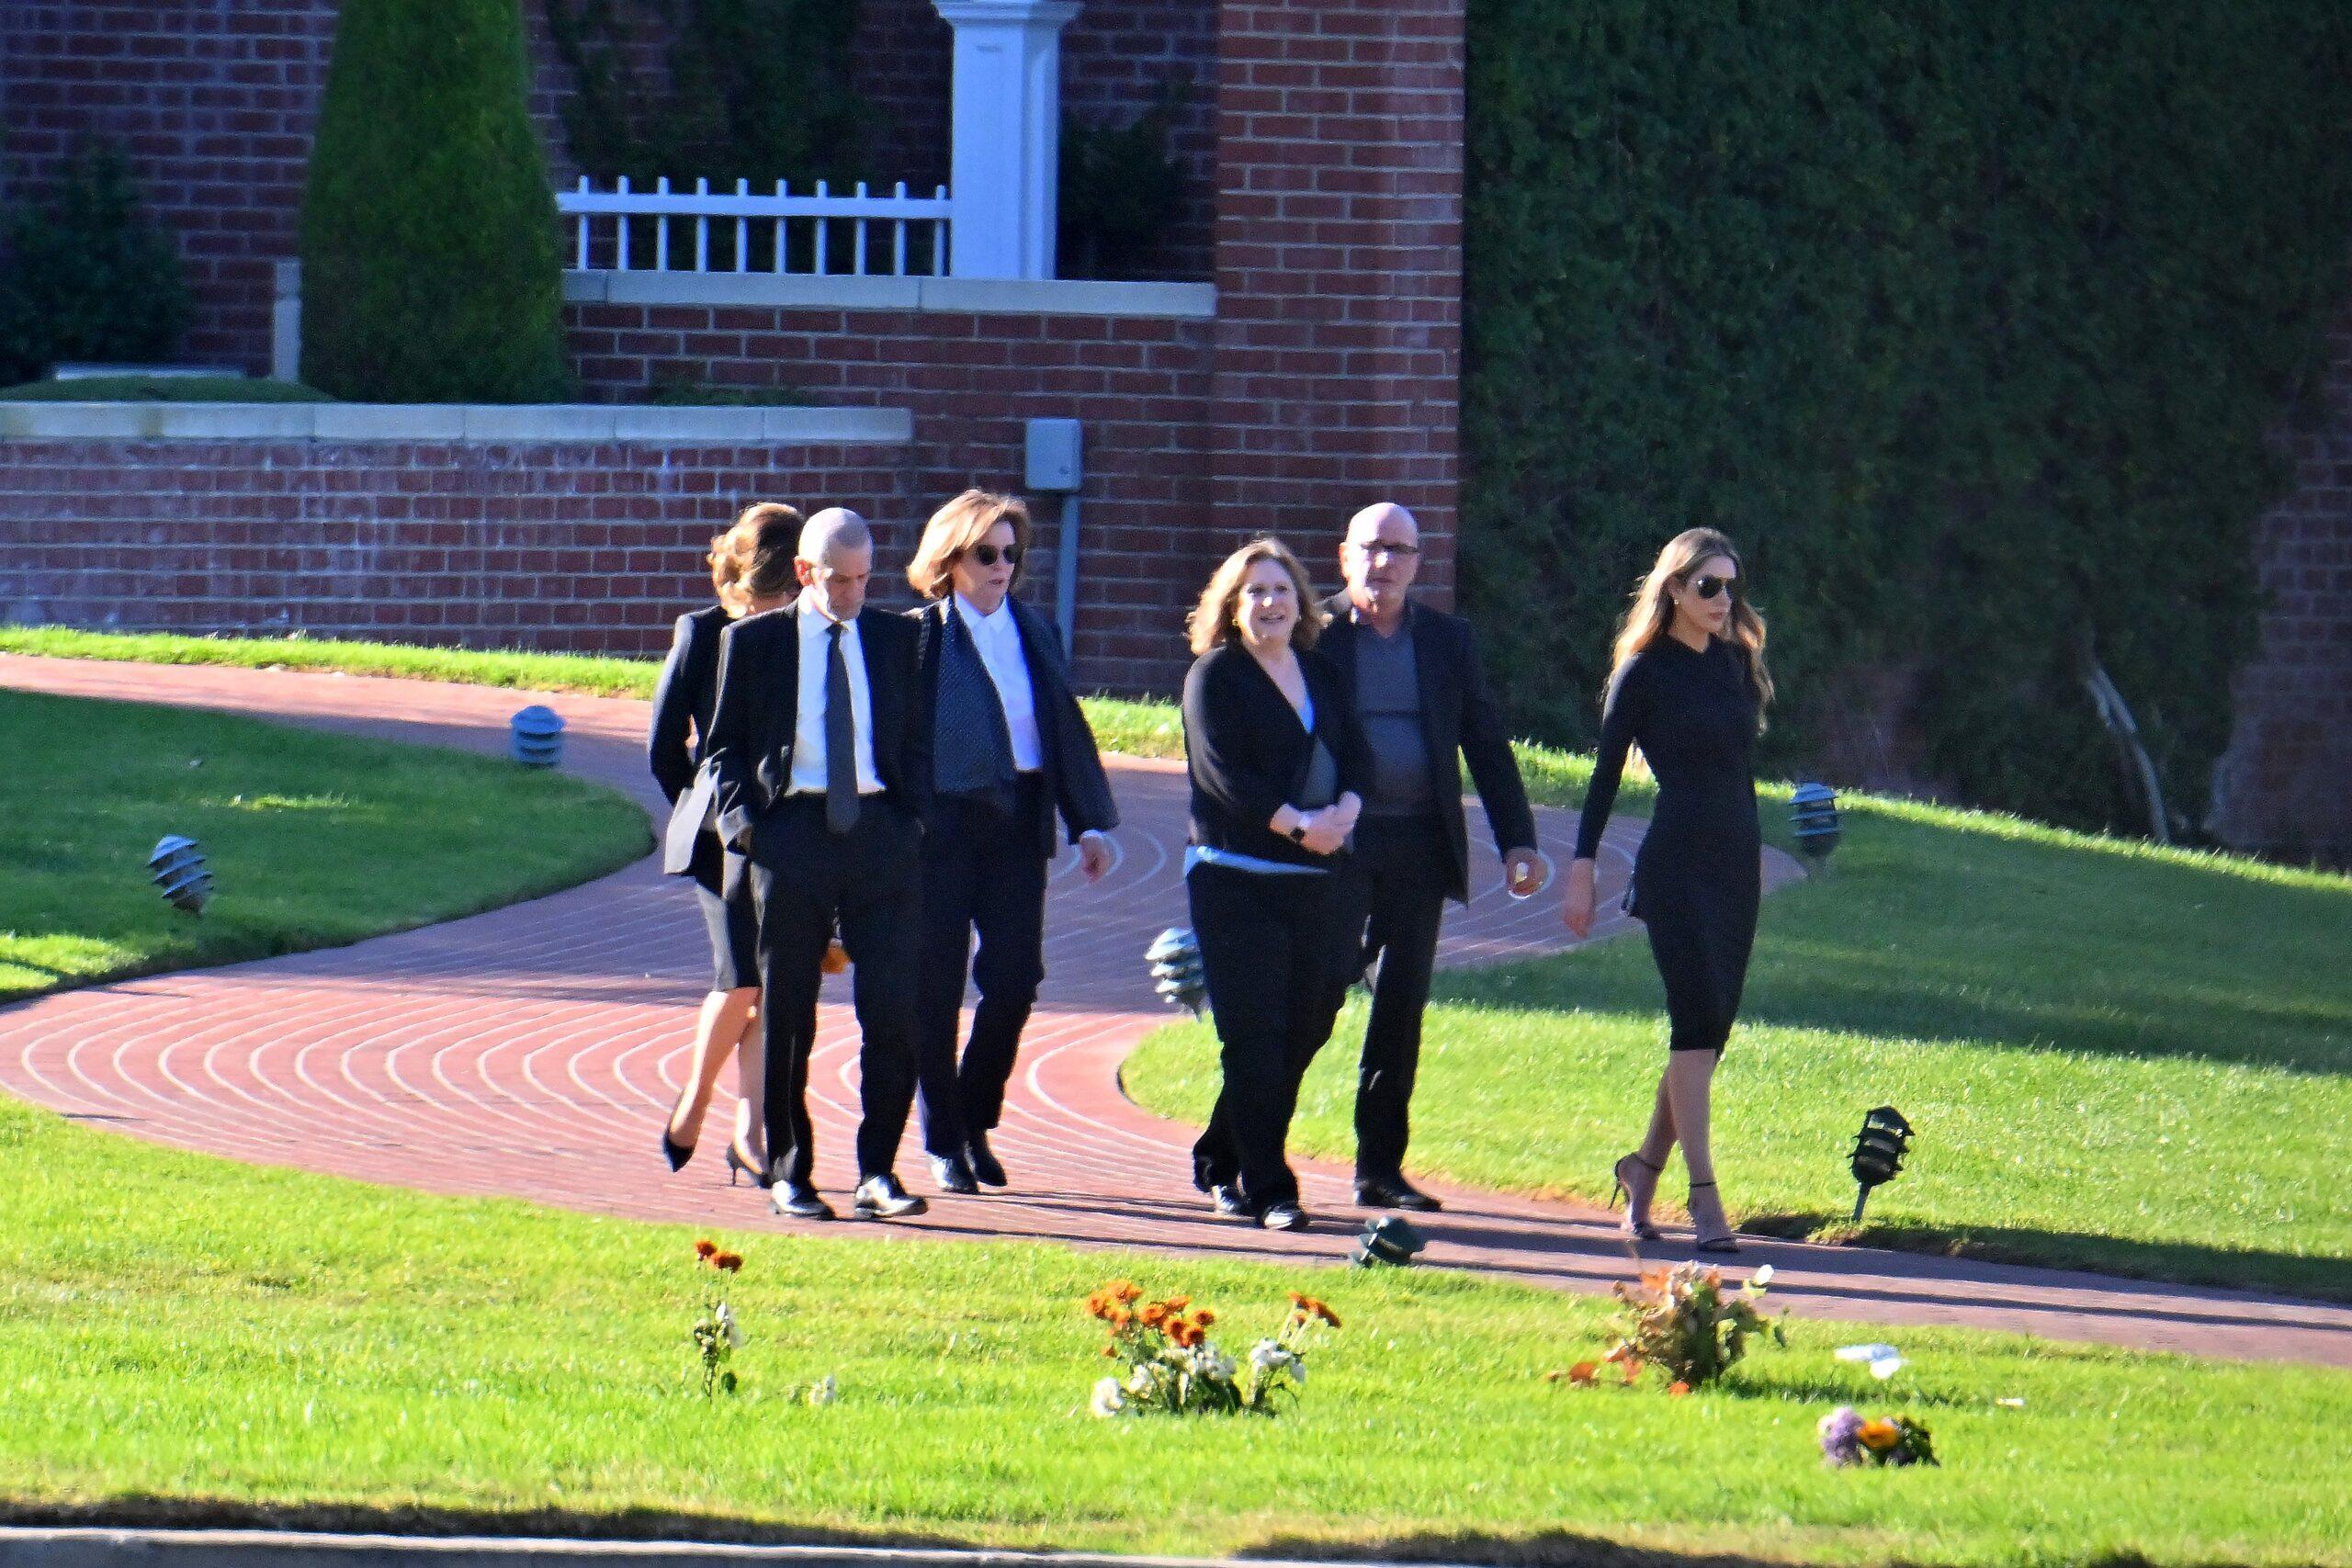 Matthew Perry Laid To Rest, 'Friends' Co-Stars Spotted At Memorial